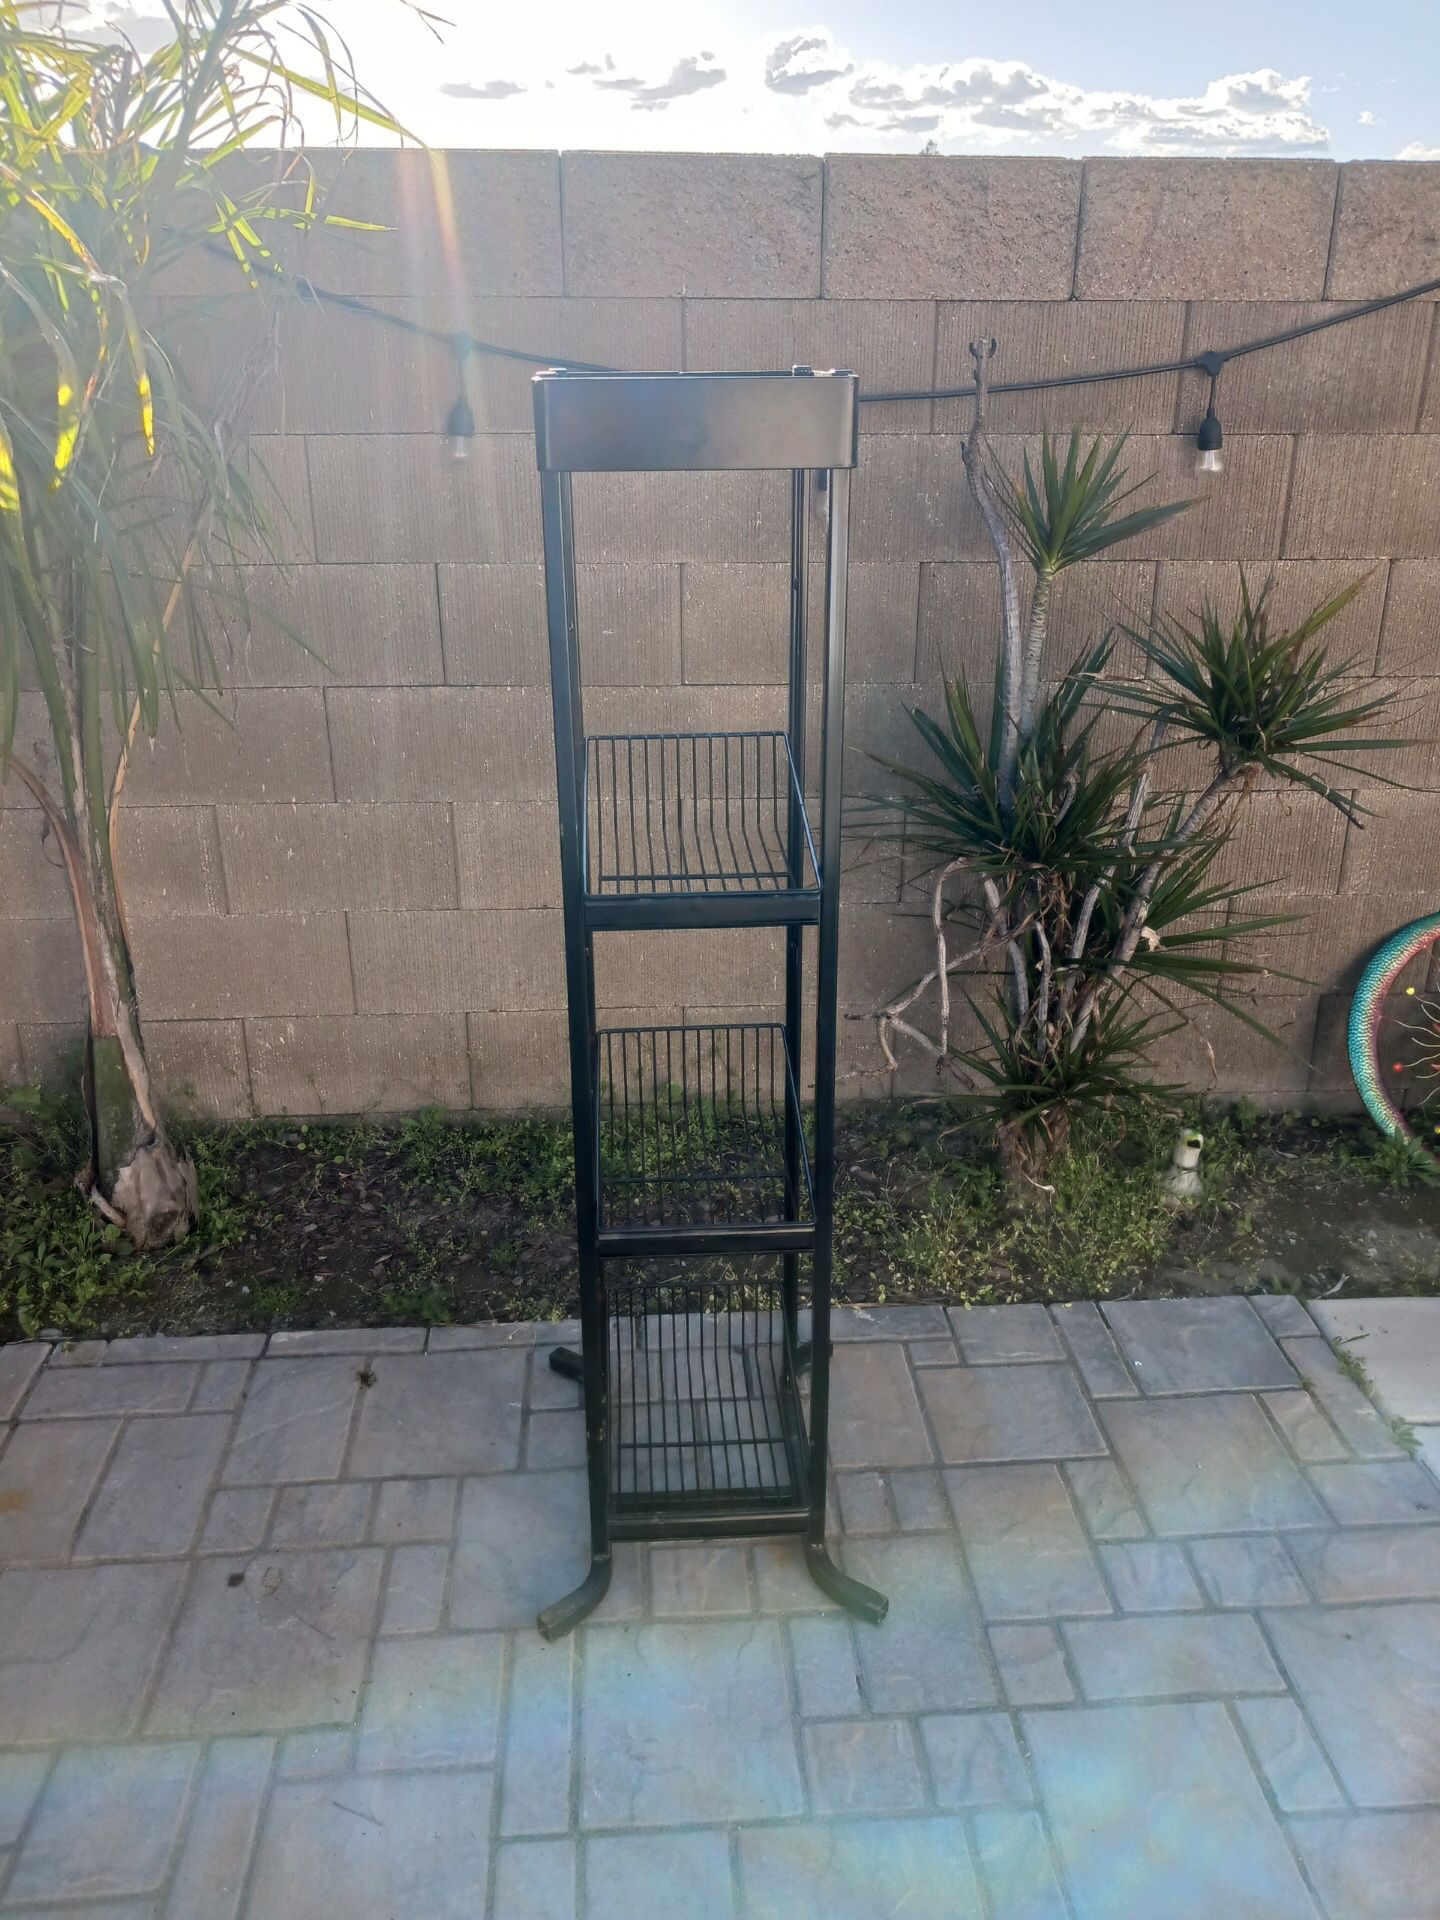 Only $40.00      OR Best Offer Great rack to organize a kitchen, garage, home office, or use to display merchandise.  Black metal frame. Wire Shelves.